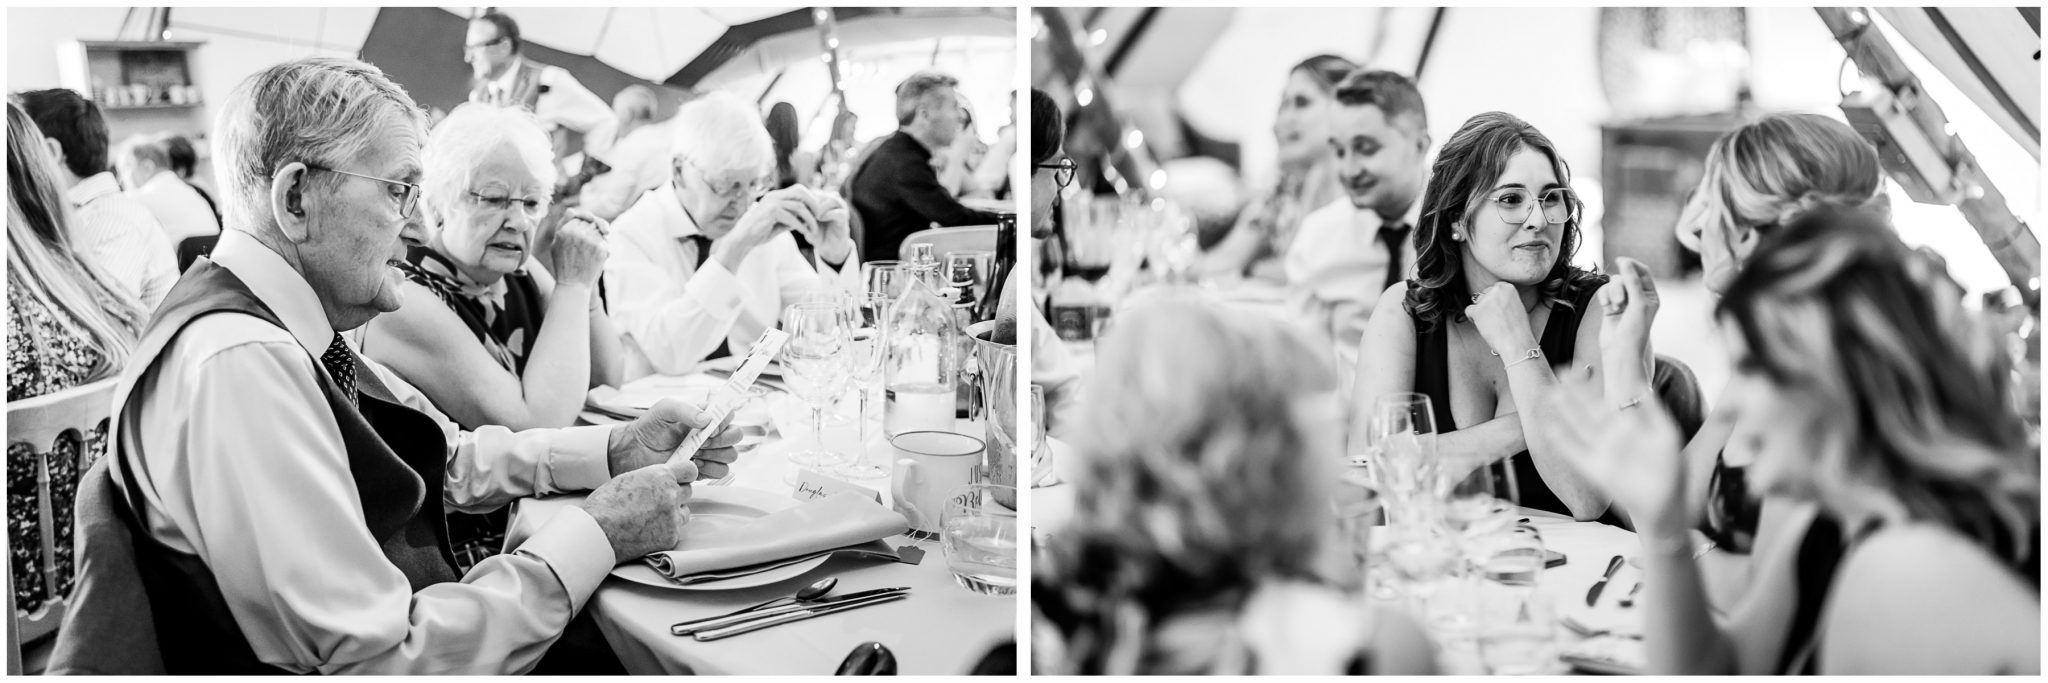 Black and white images of guests chatting during the meal